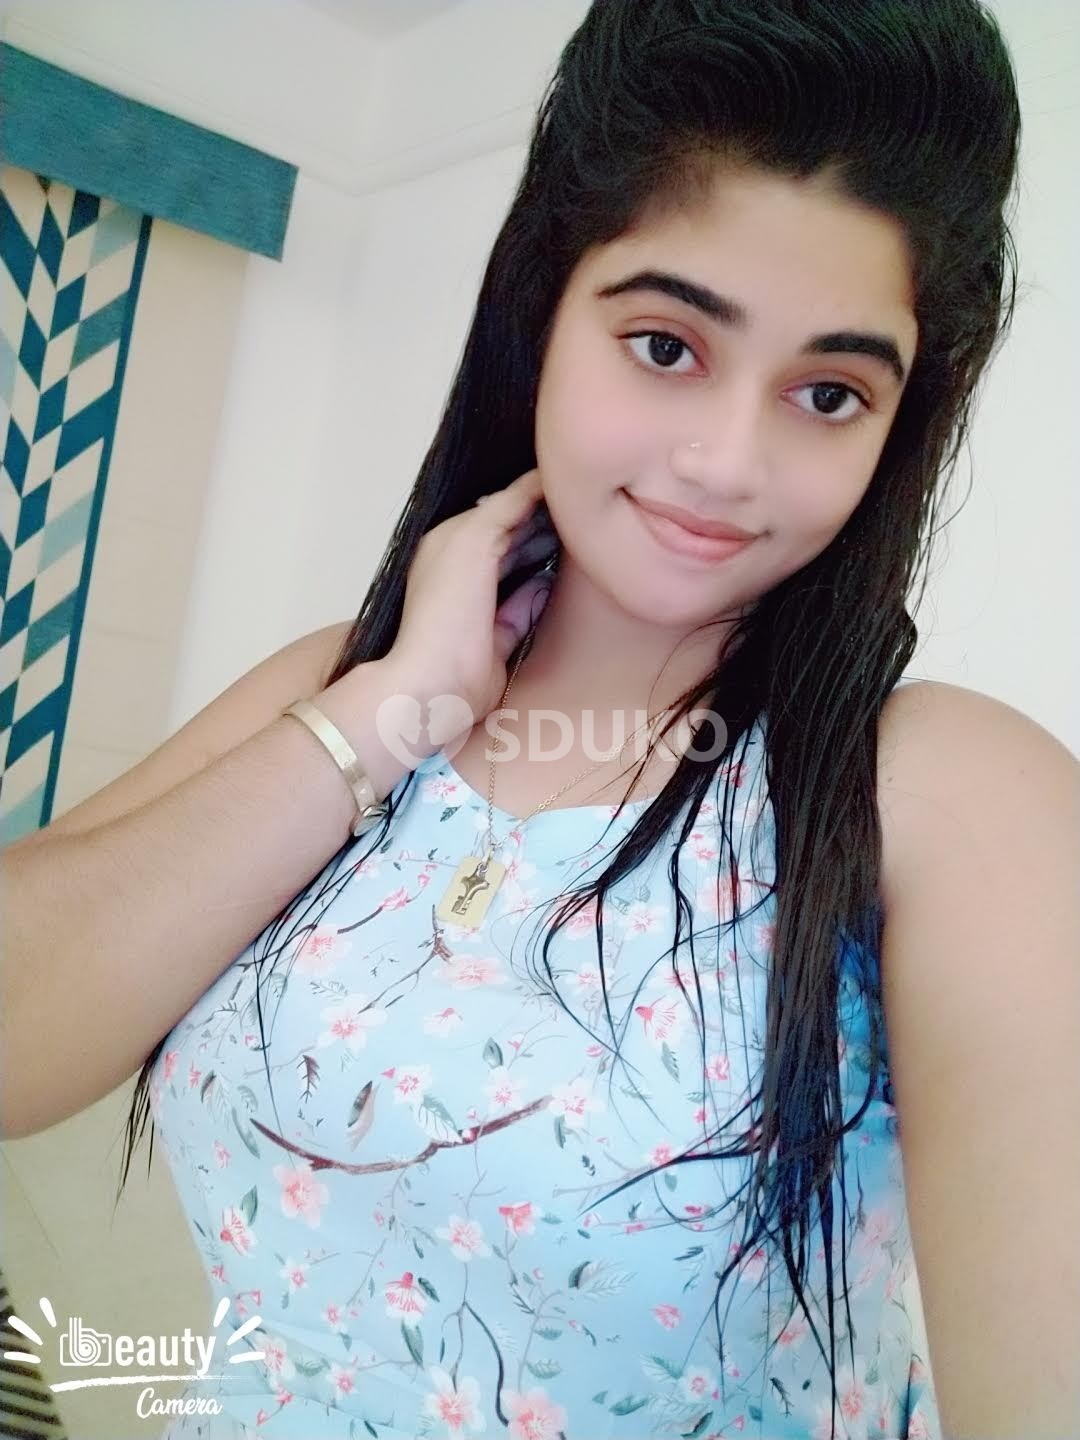 Bikaner 🌿🌴Home service hotel 🌲🌿service 24 hr available college🌾🌿 girl bhabhi and aunty video call 🤙